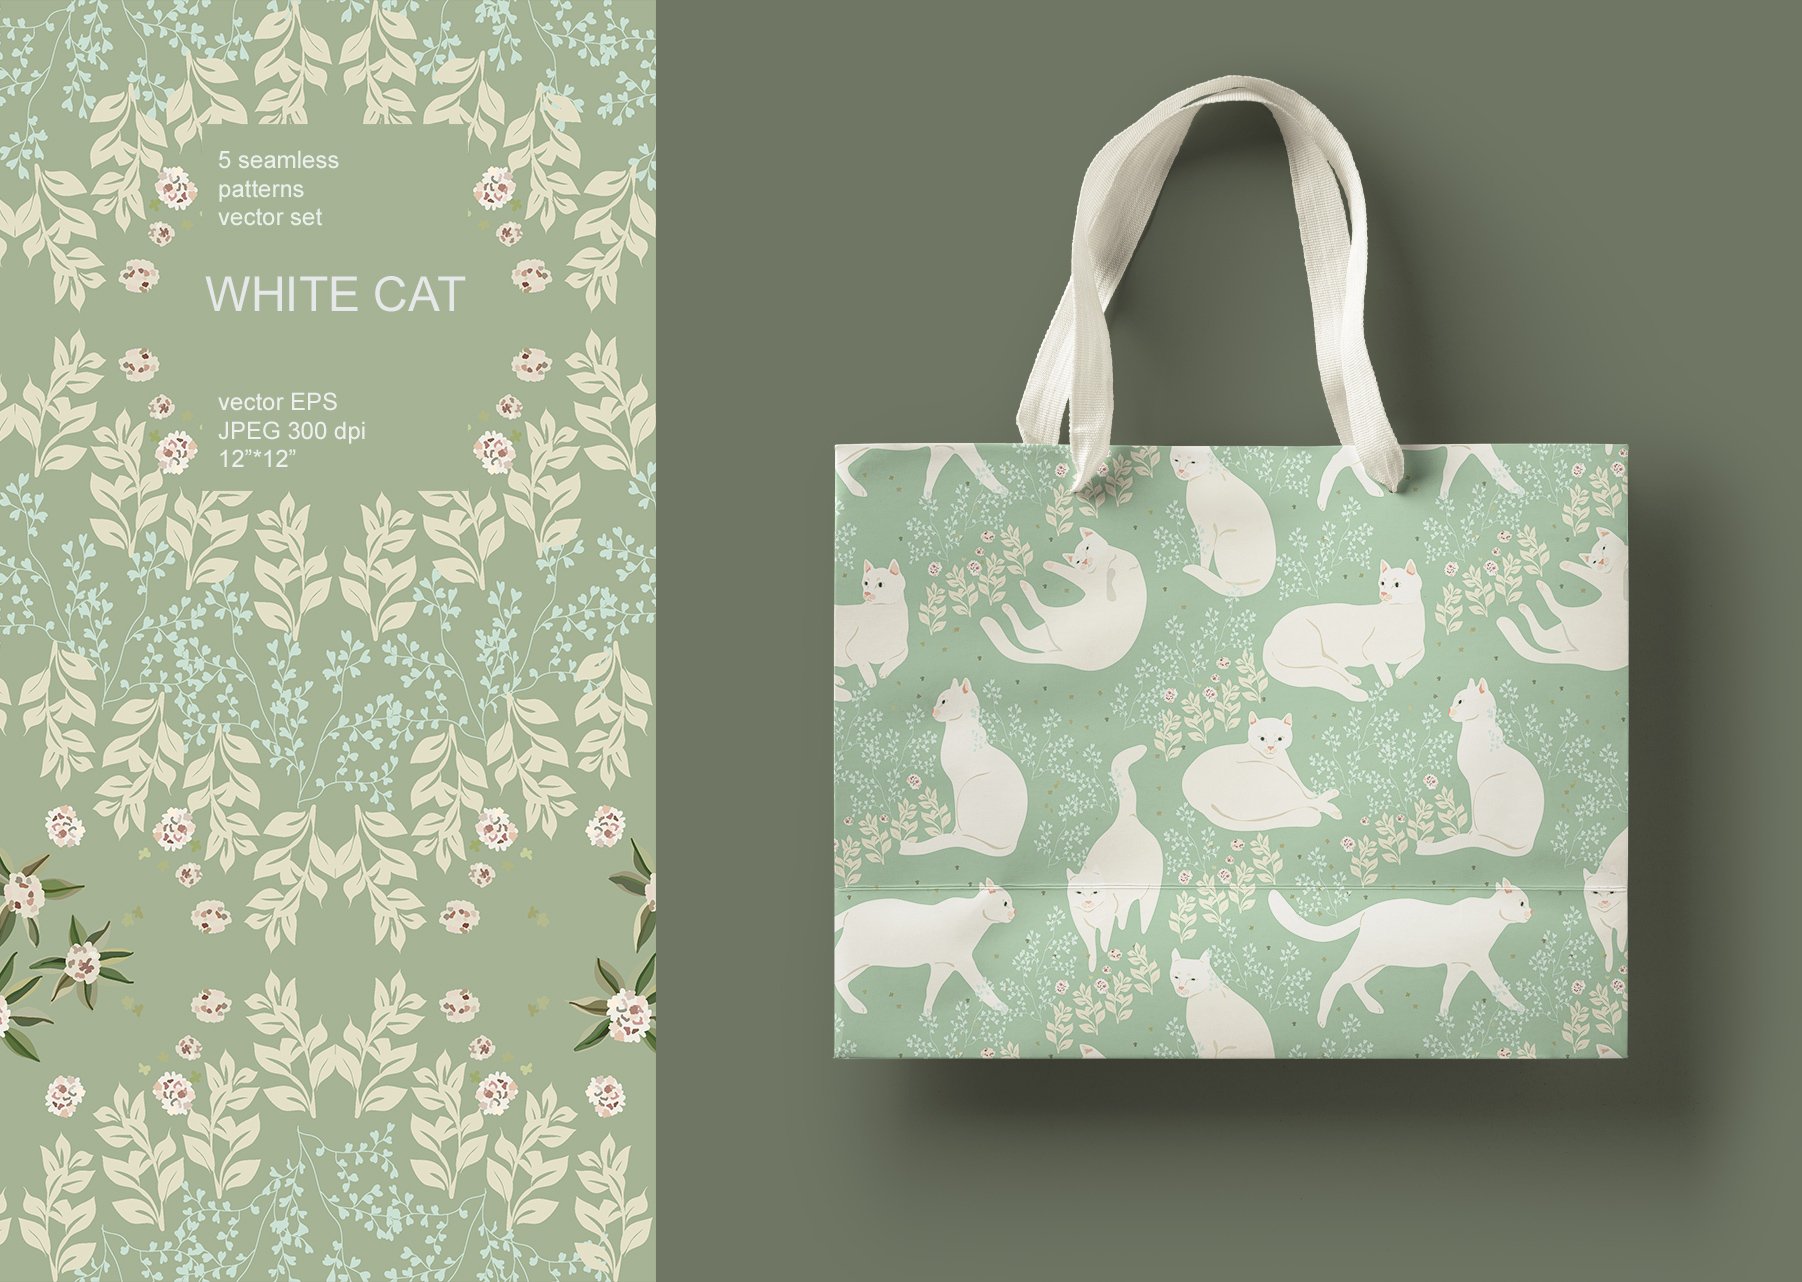 Light green with white cats on the bag.